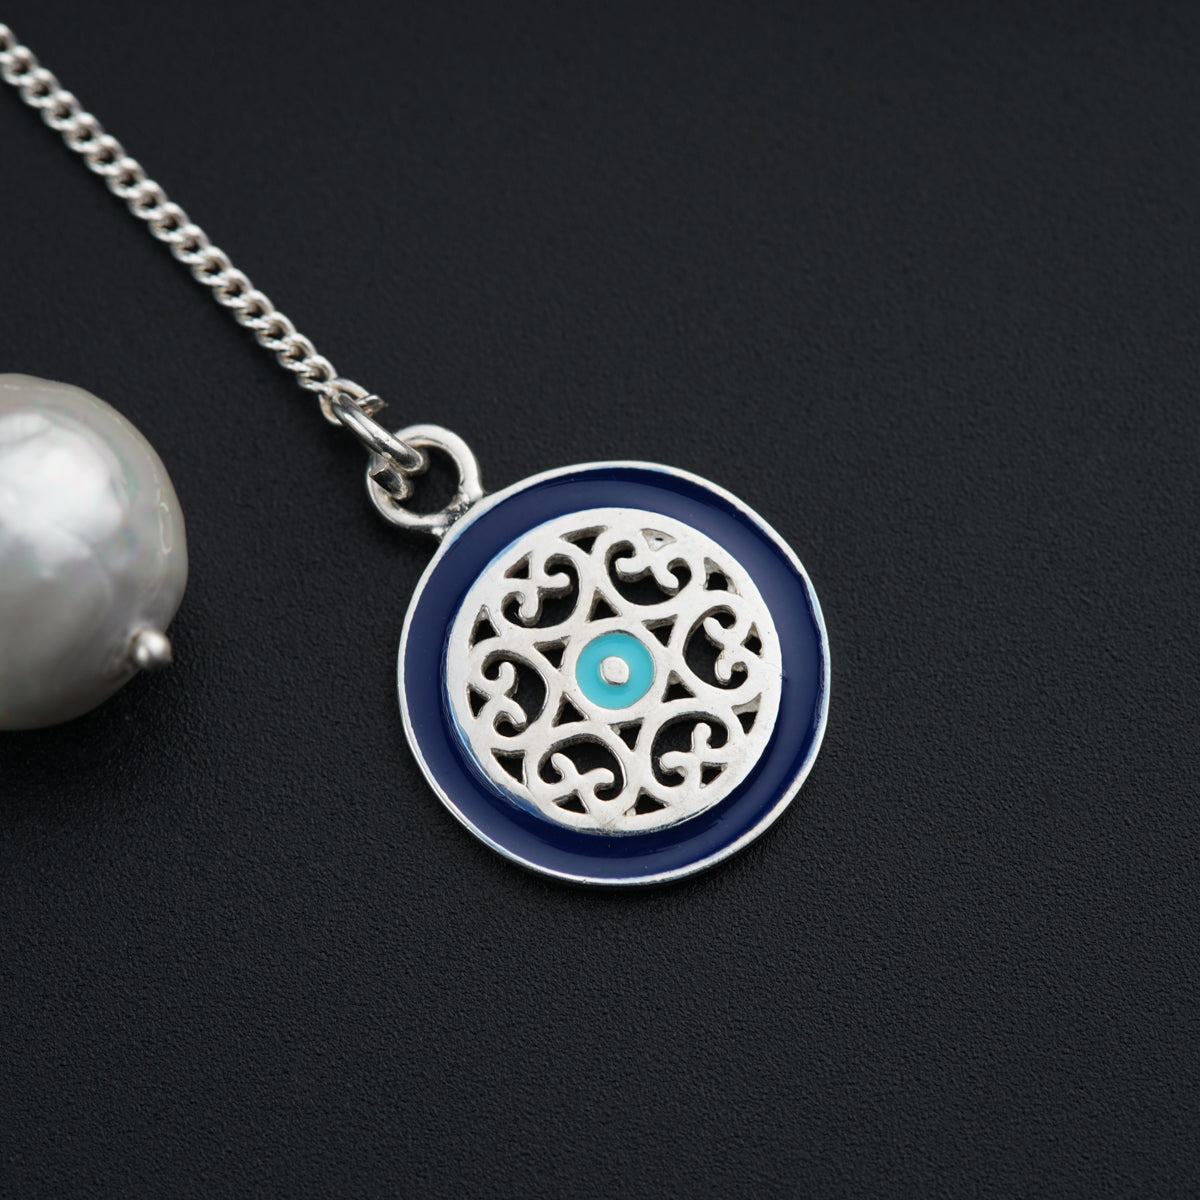 a necklace with a blue and white design on it